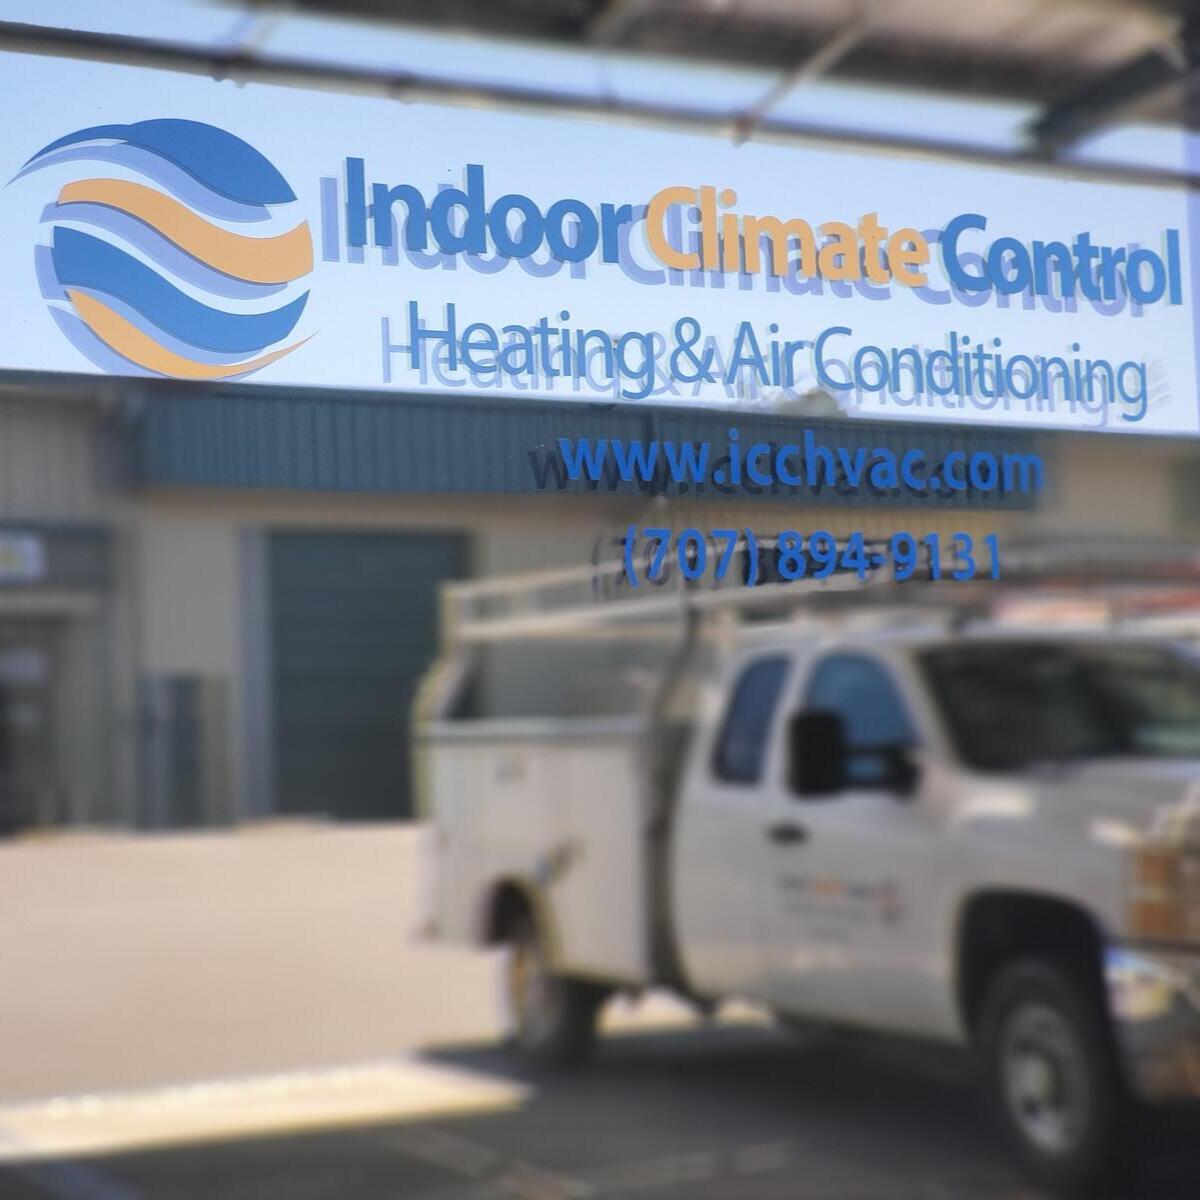 Indoor Climate Control 70 Commerce Ln Suite G, Cloverdale California 95425